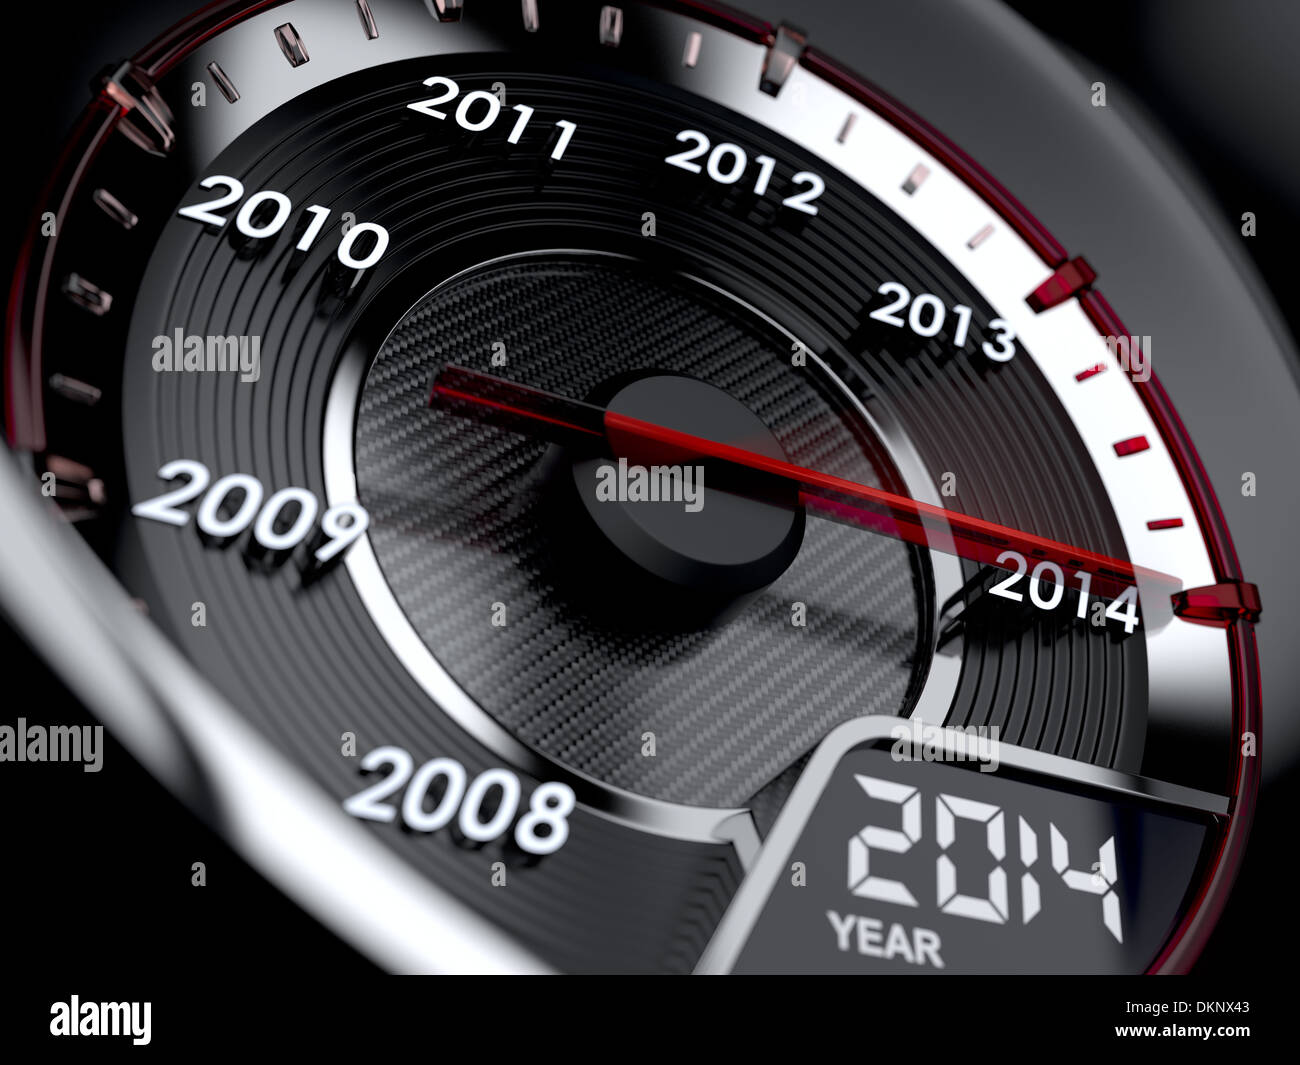 3d illustration of 2014 year car speedometer. Countdown concept Stock Photo